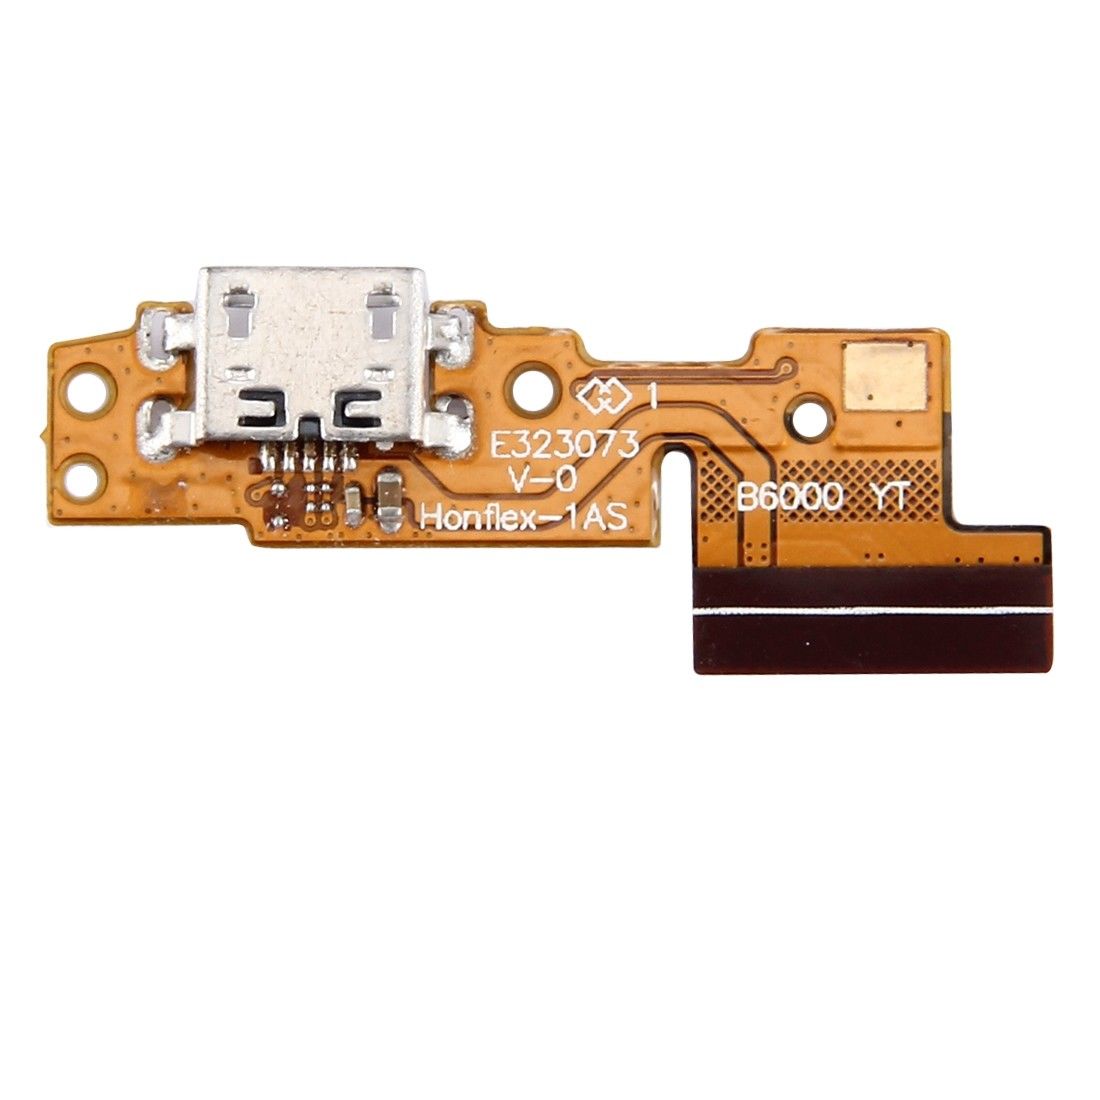 Lenovo Yoga 8 B6000 Charging Port - Blade 8 for [product_price] - First Help Tech